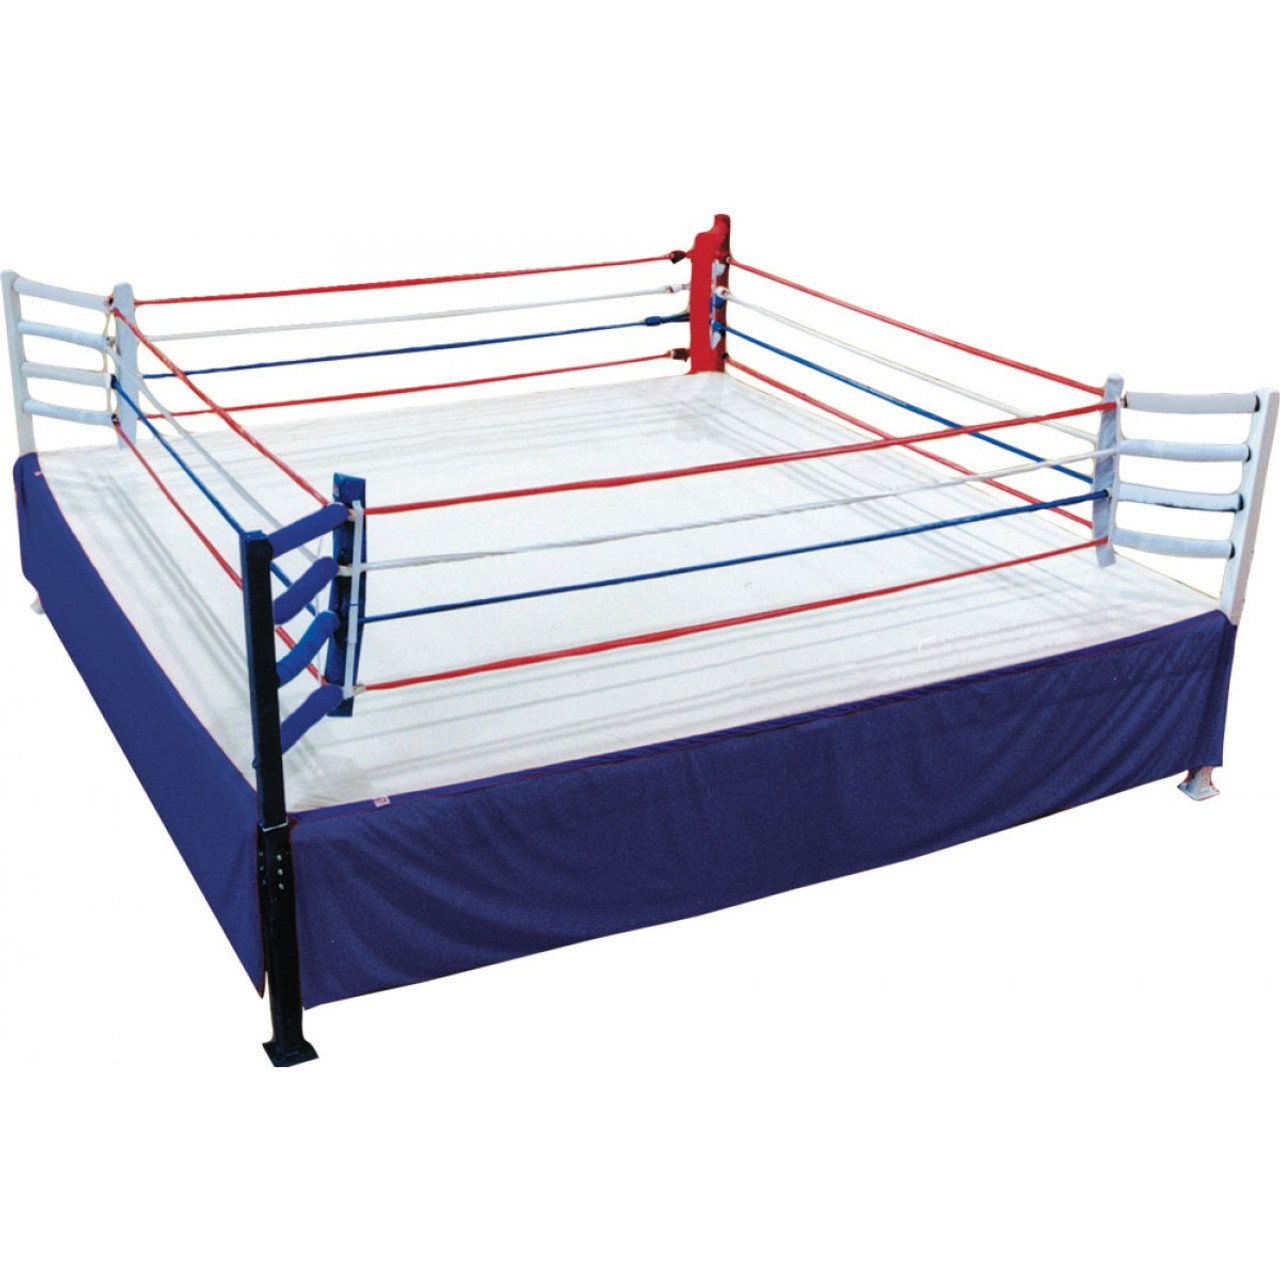 PROLAST Pro Fight Elevated Professional Boxing Ring